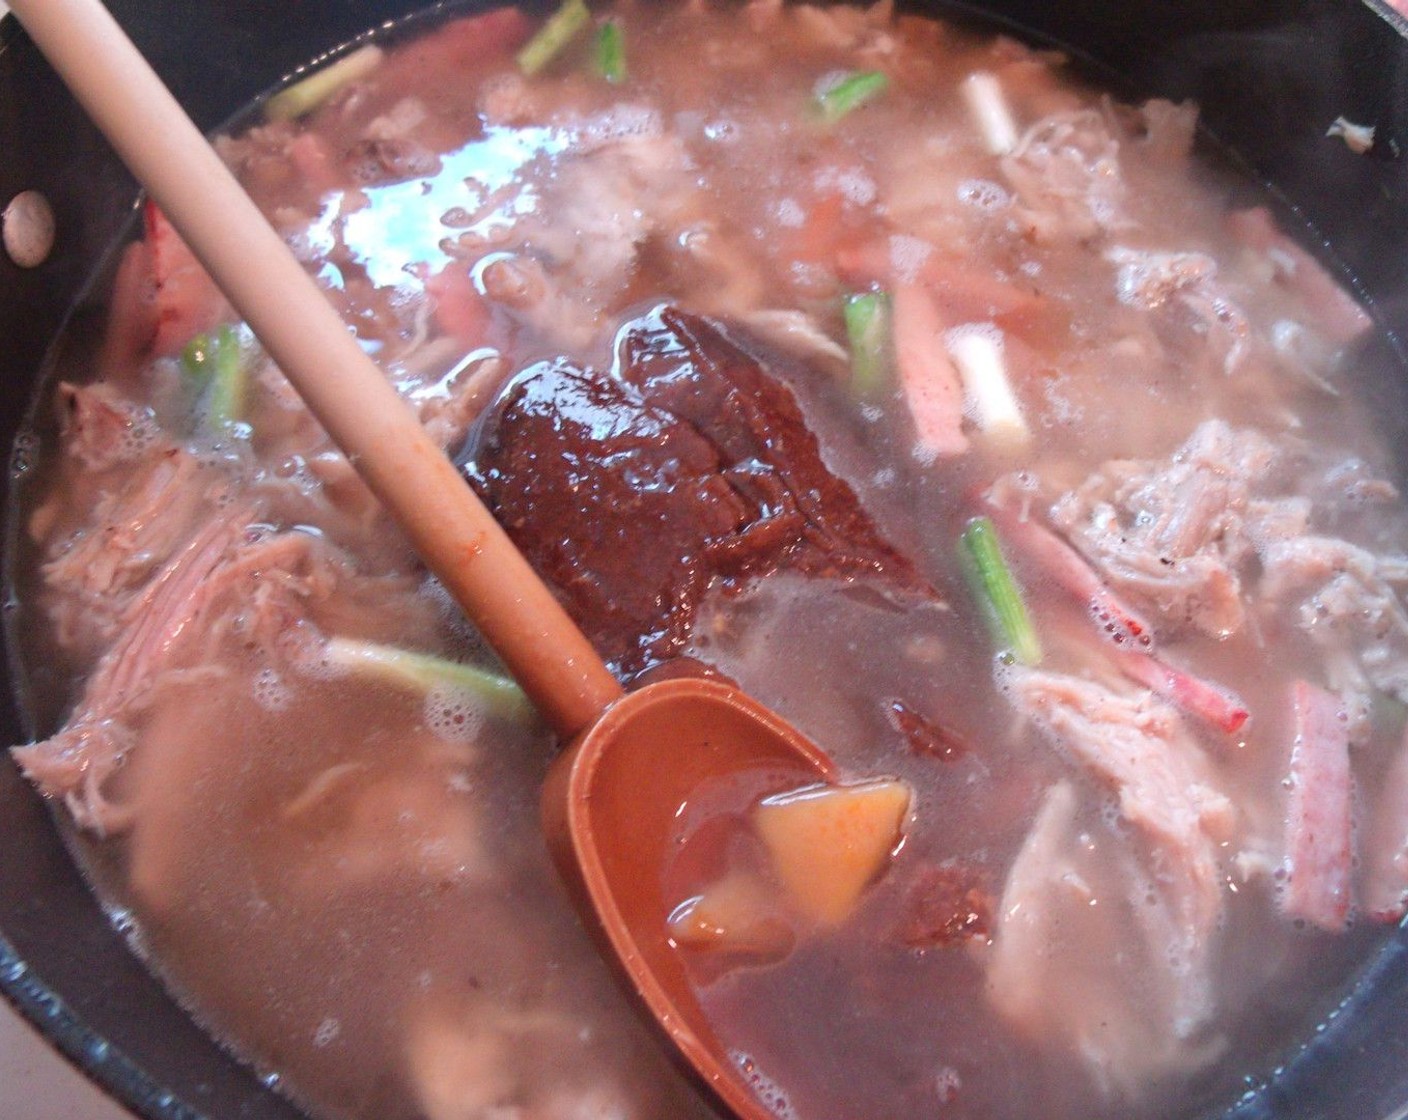 step 6 Add the Char Siu (6 oz), Chicken Stock (4 cups), Hoisin Sauce (1/4 cup) and Chili Paste (1 tsp). Bring to a simmer for 2 minutes.